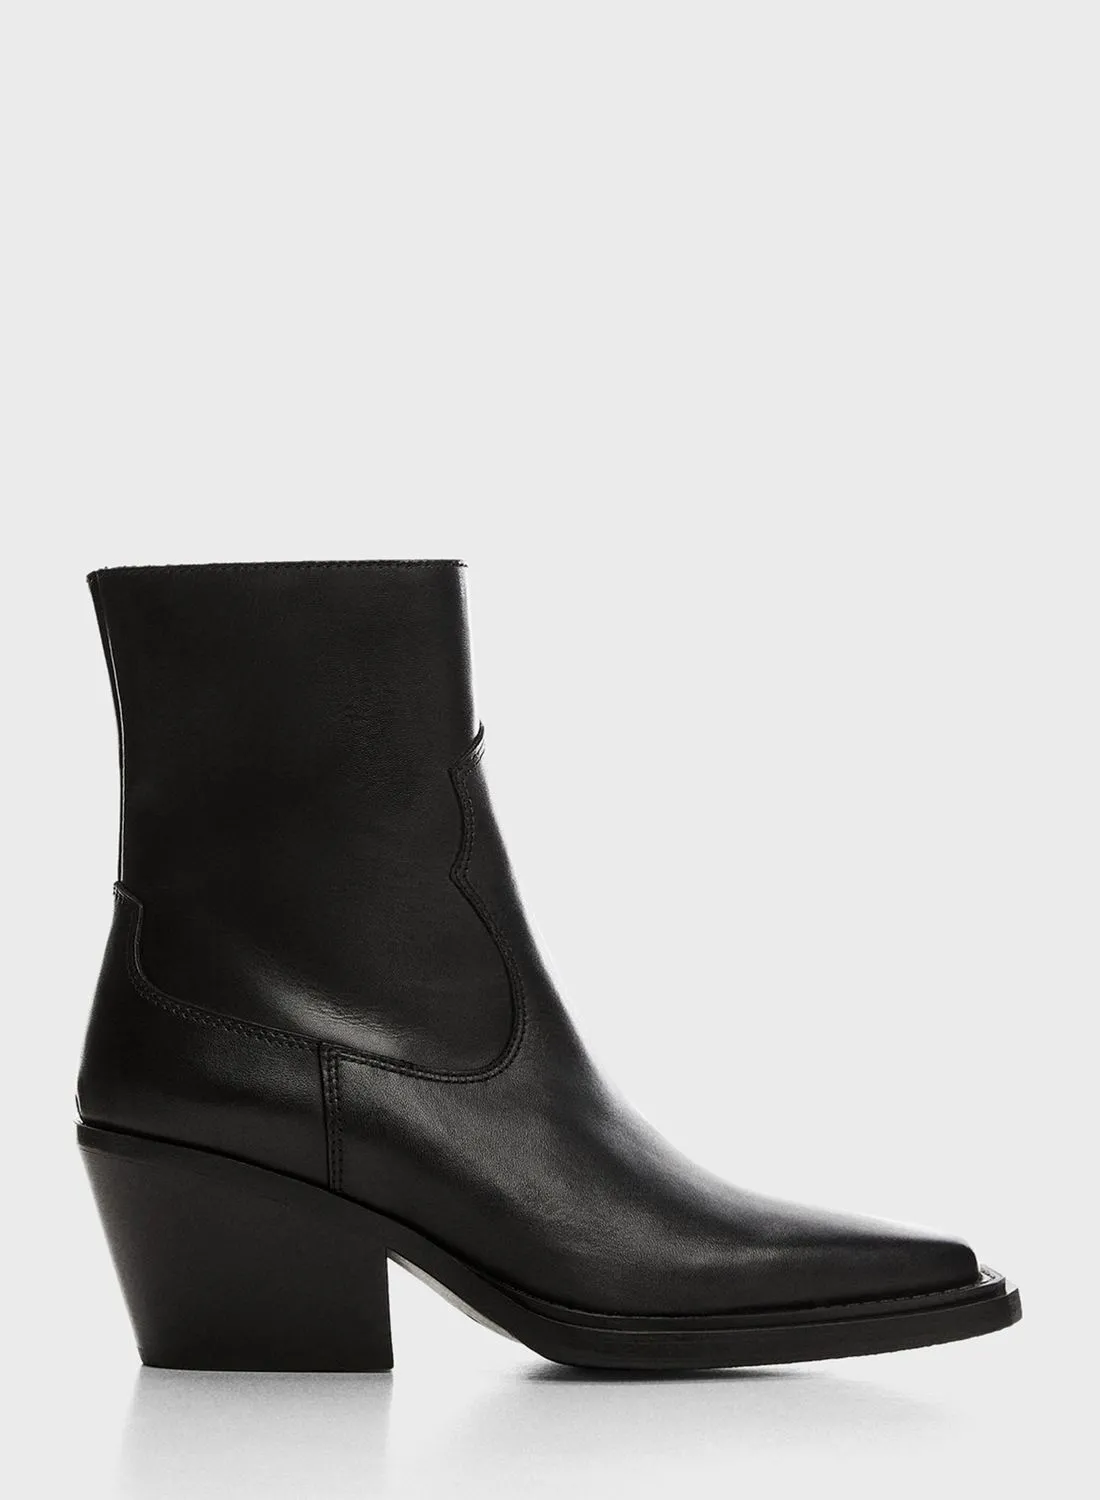 MANGO Ande Ankle Boots